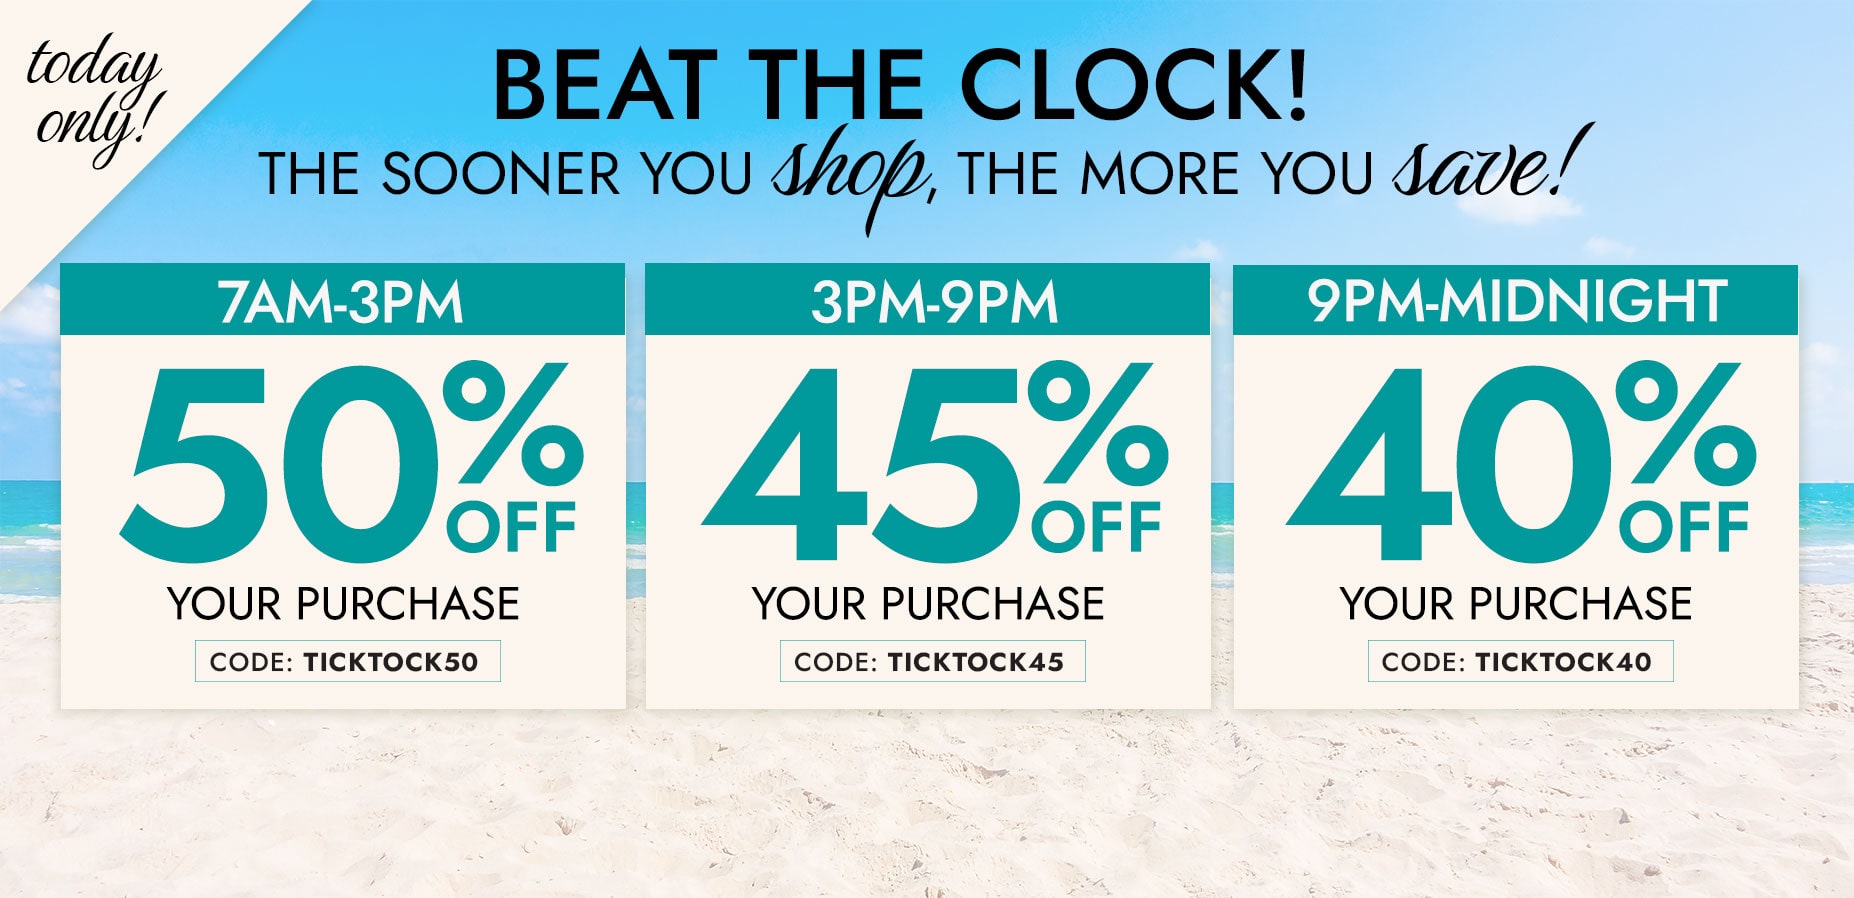 BEAT THE CLOCK the sooner you shop the more you save!